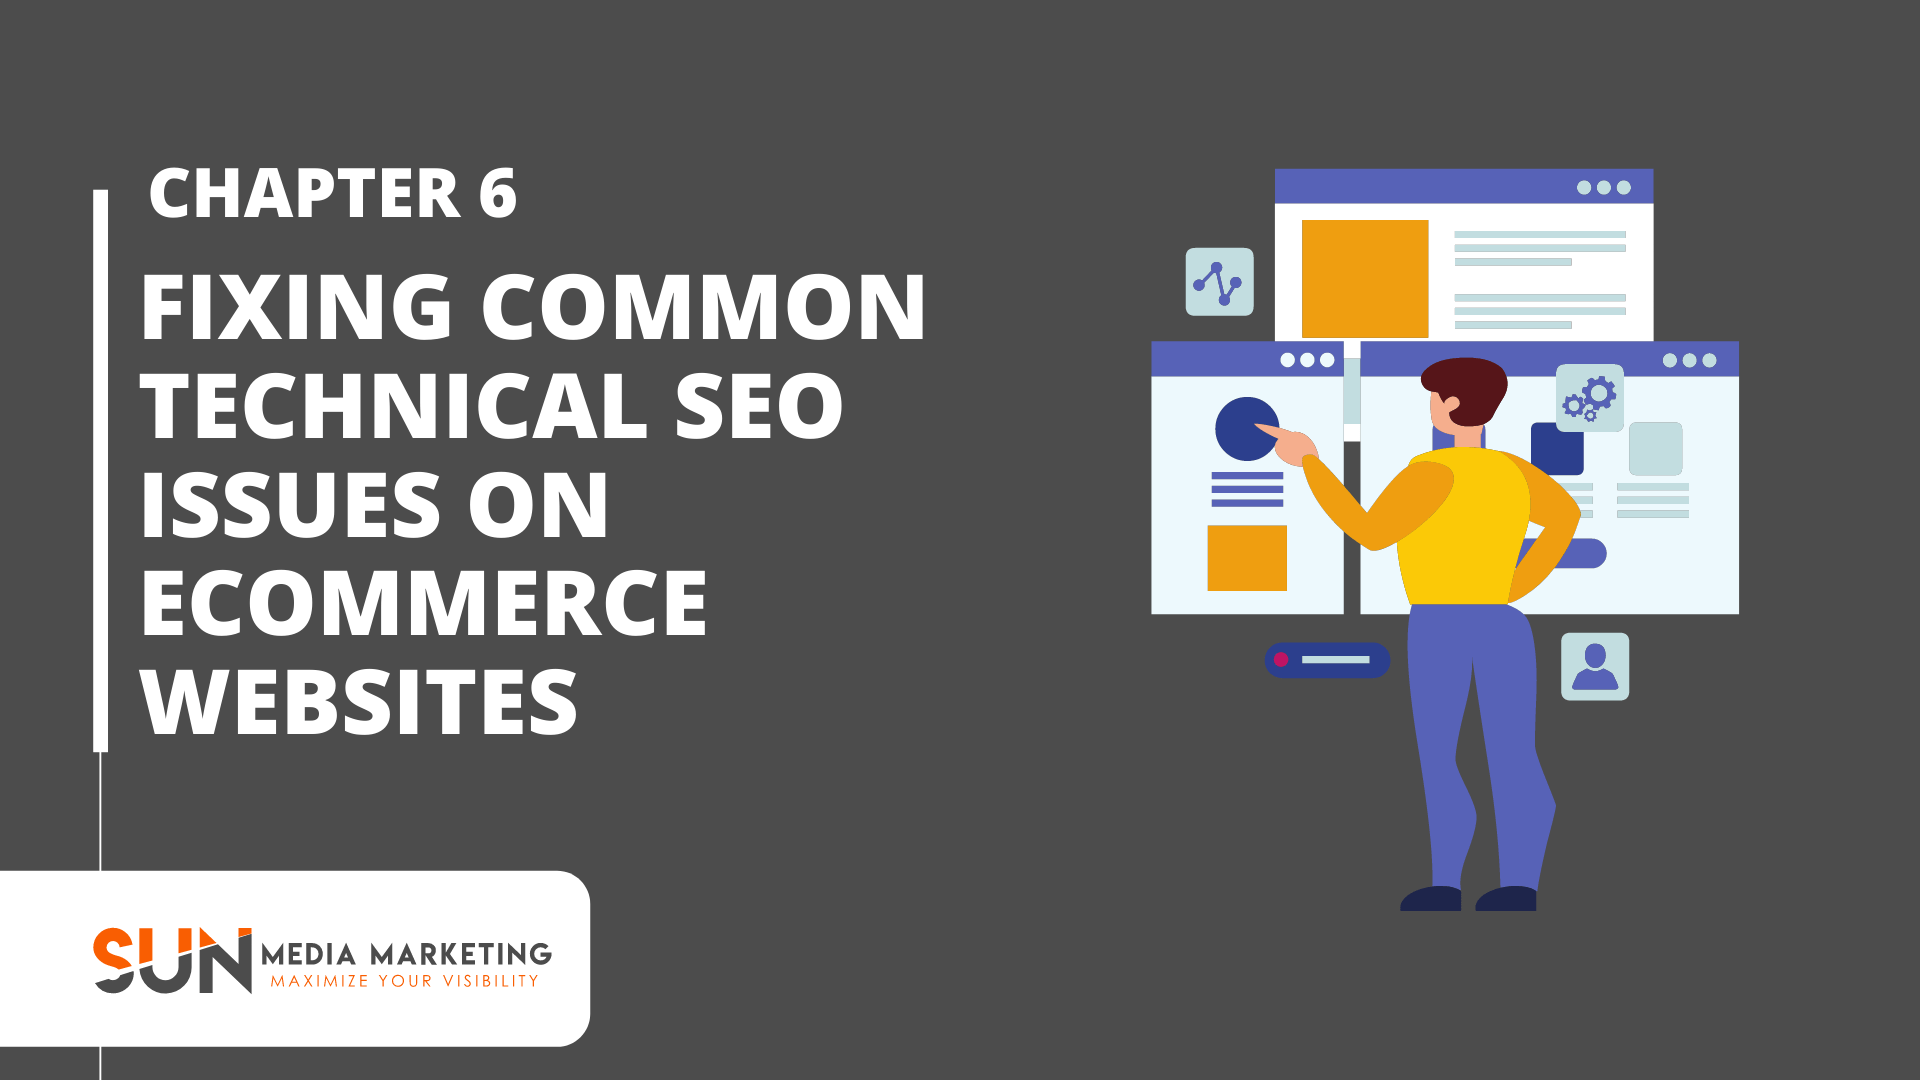 Fixing Common Technical SEO Issues on eCommerce Websites